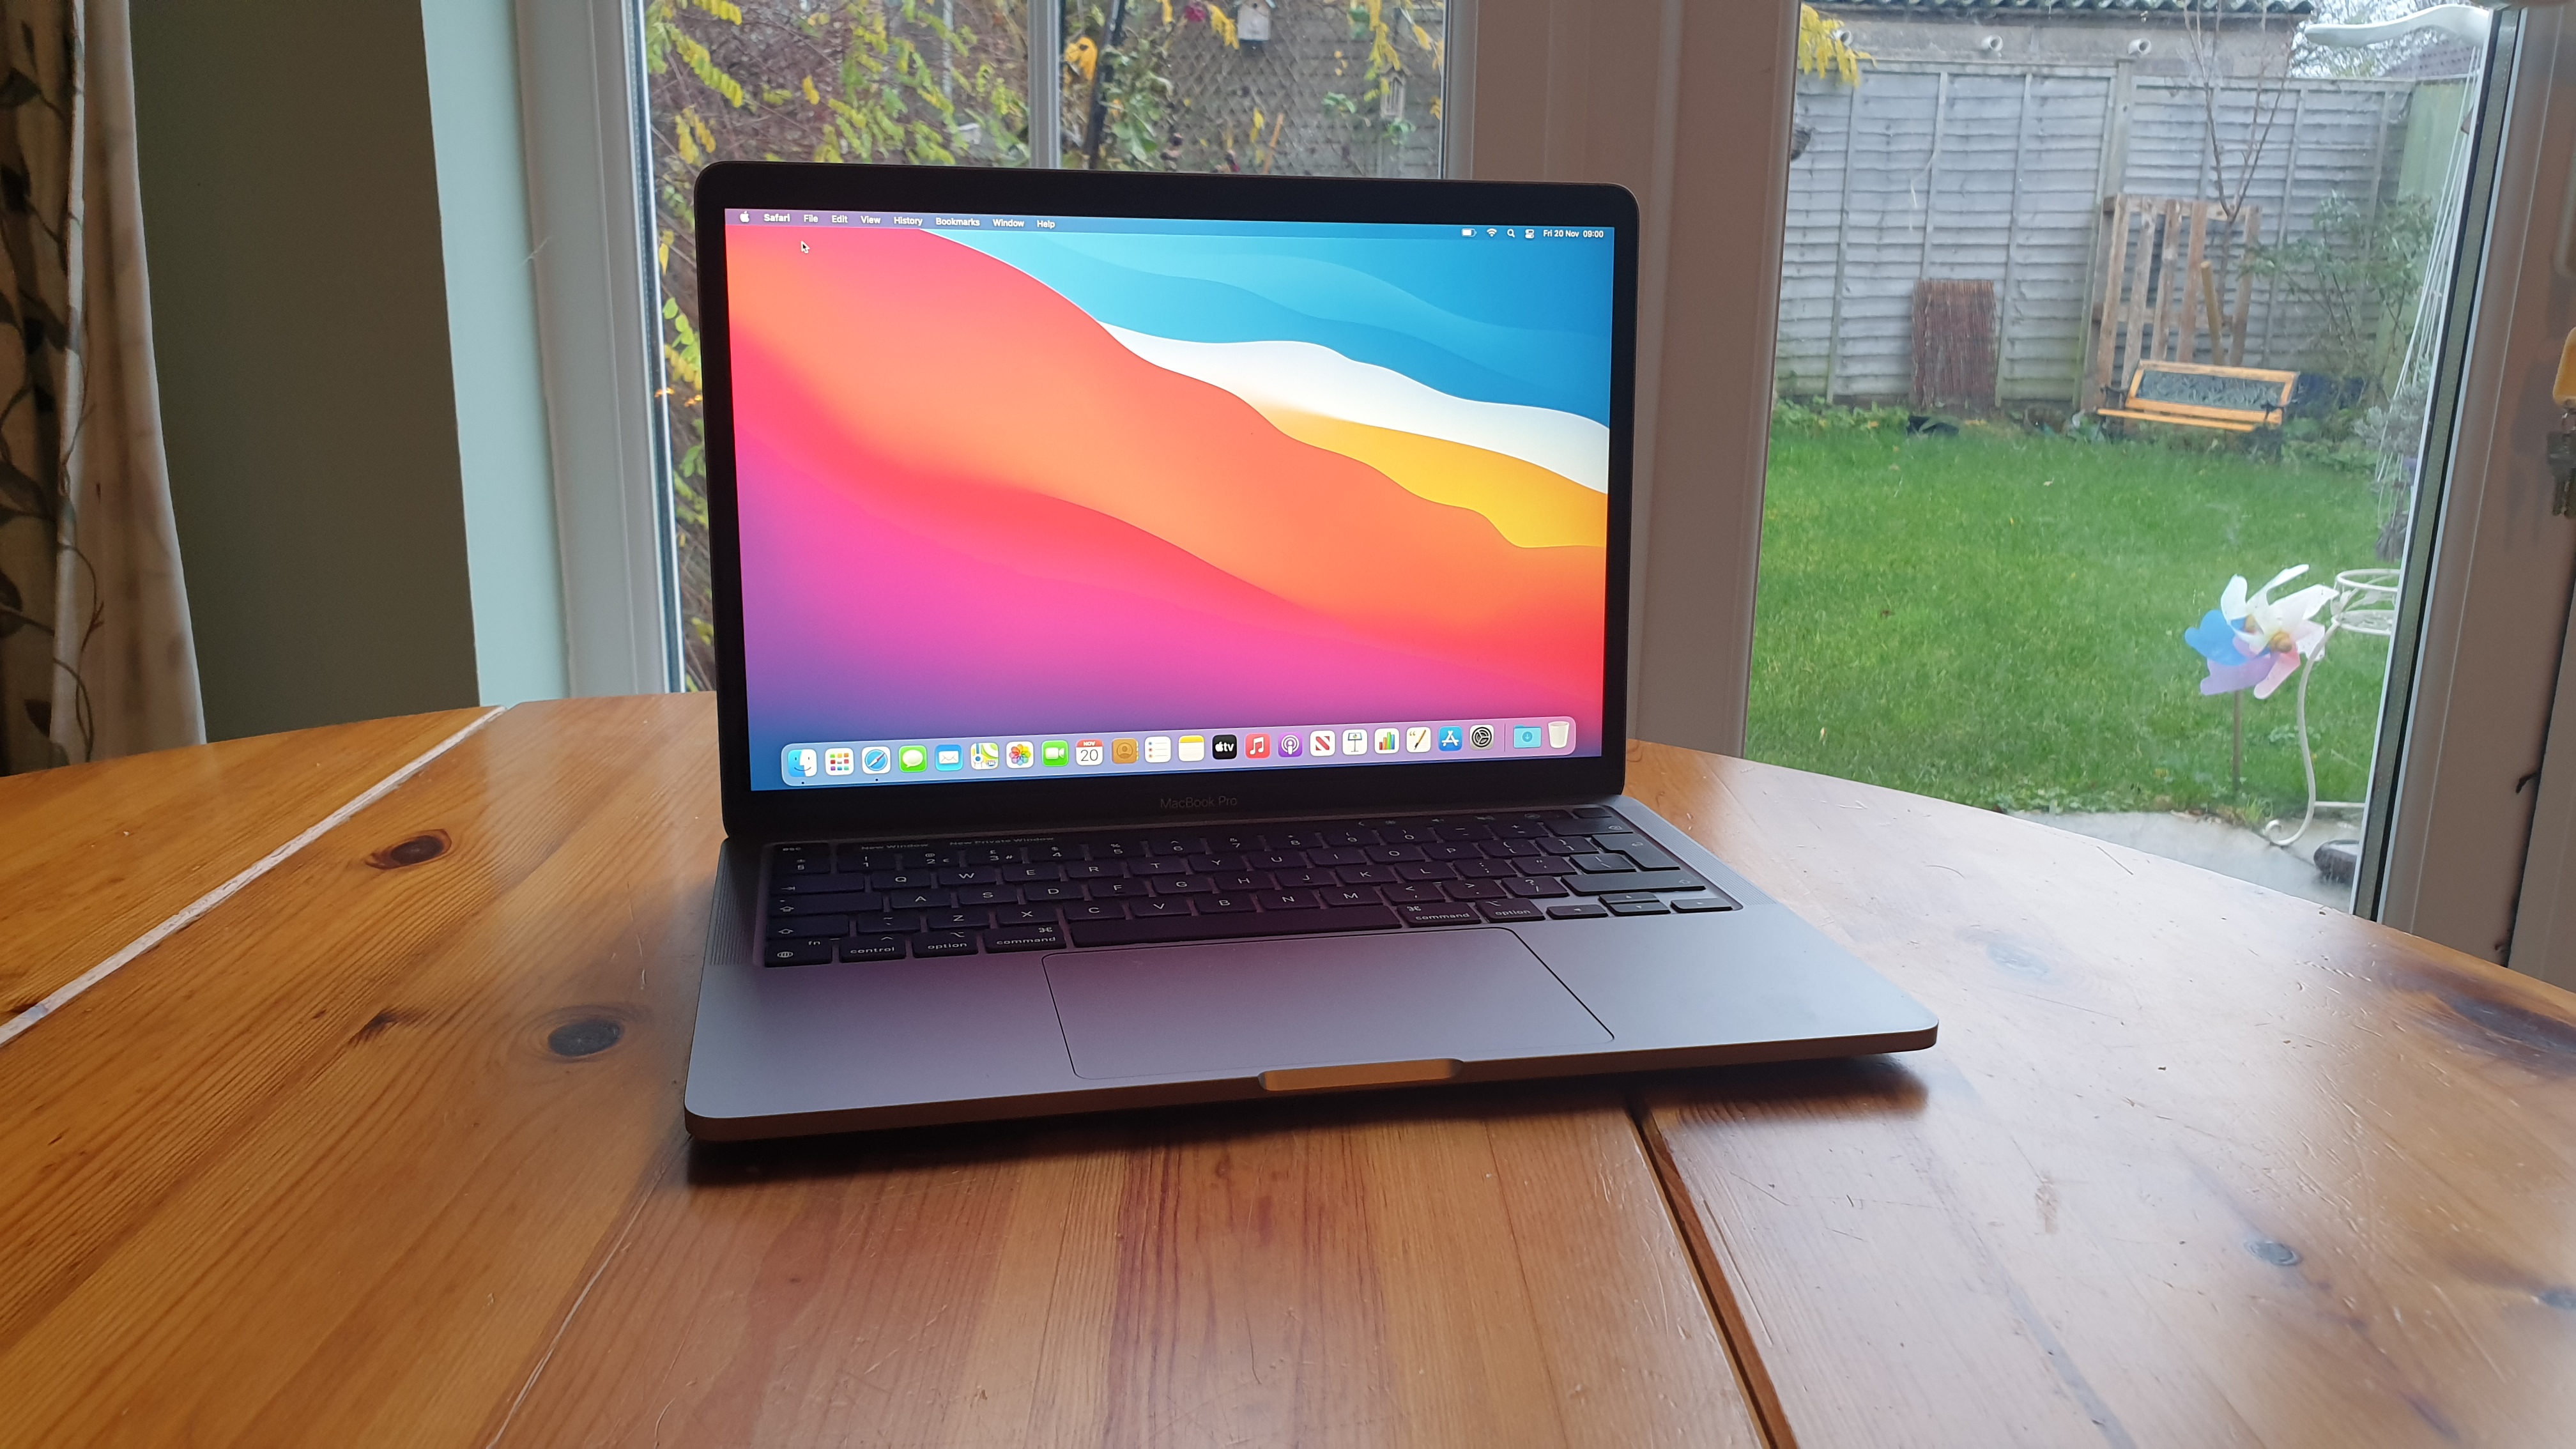 MacBook Pro 13-inch (M1, 2020), one of the best laptops for architects, on a table